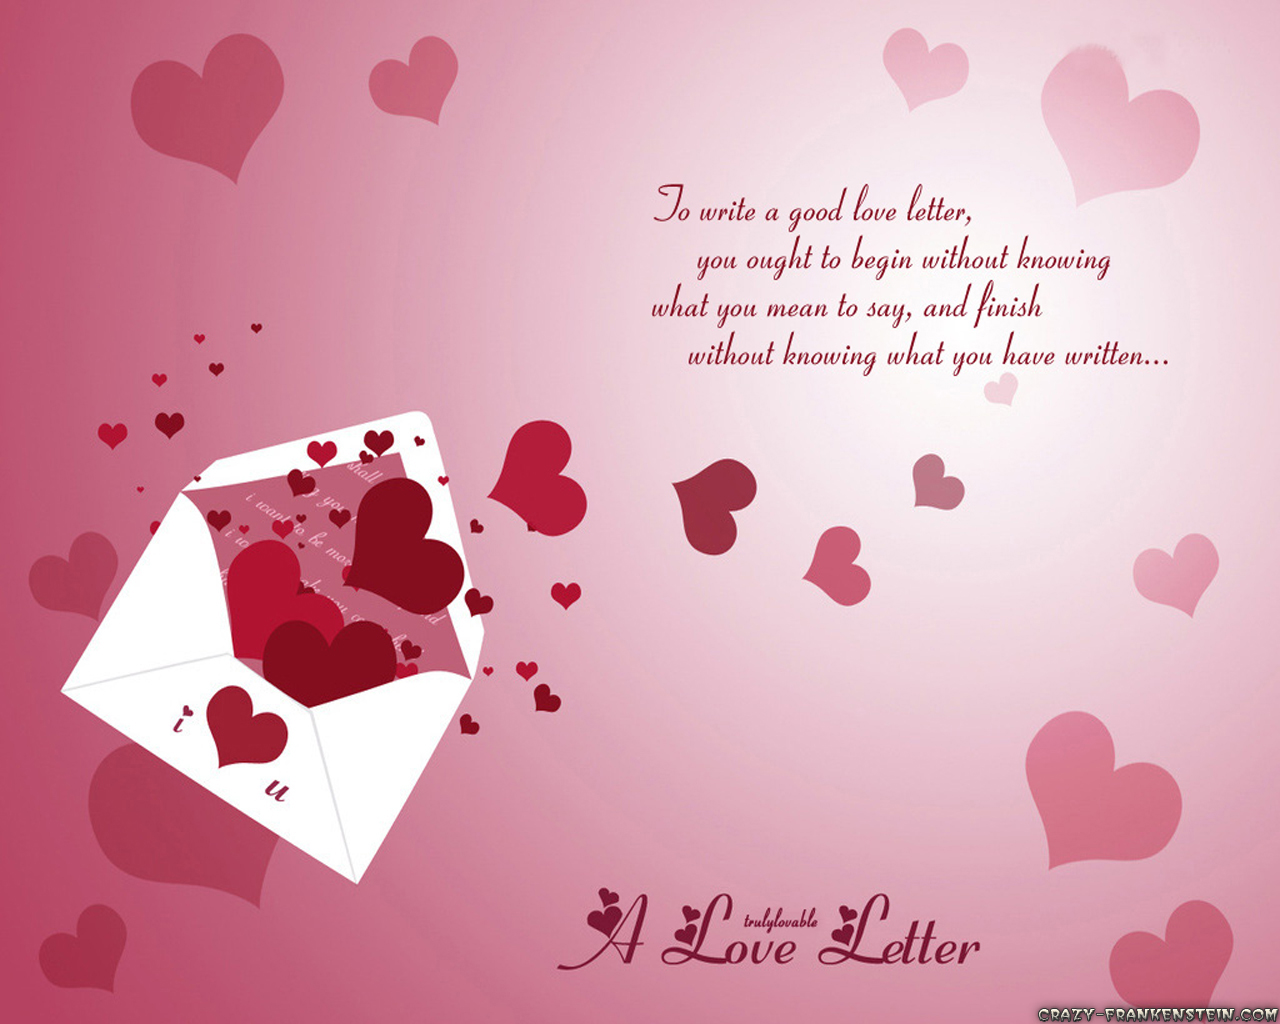  Heart wallpapers Free SMS Free Quotes Free Messages Free Sayings